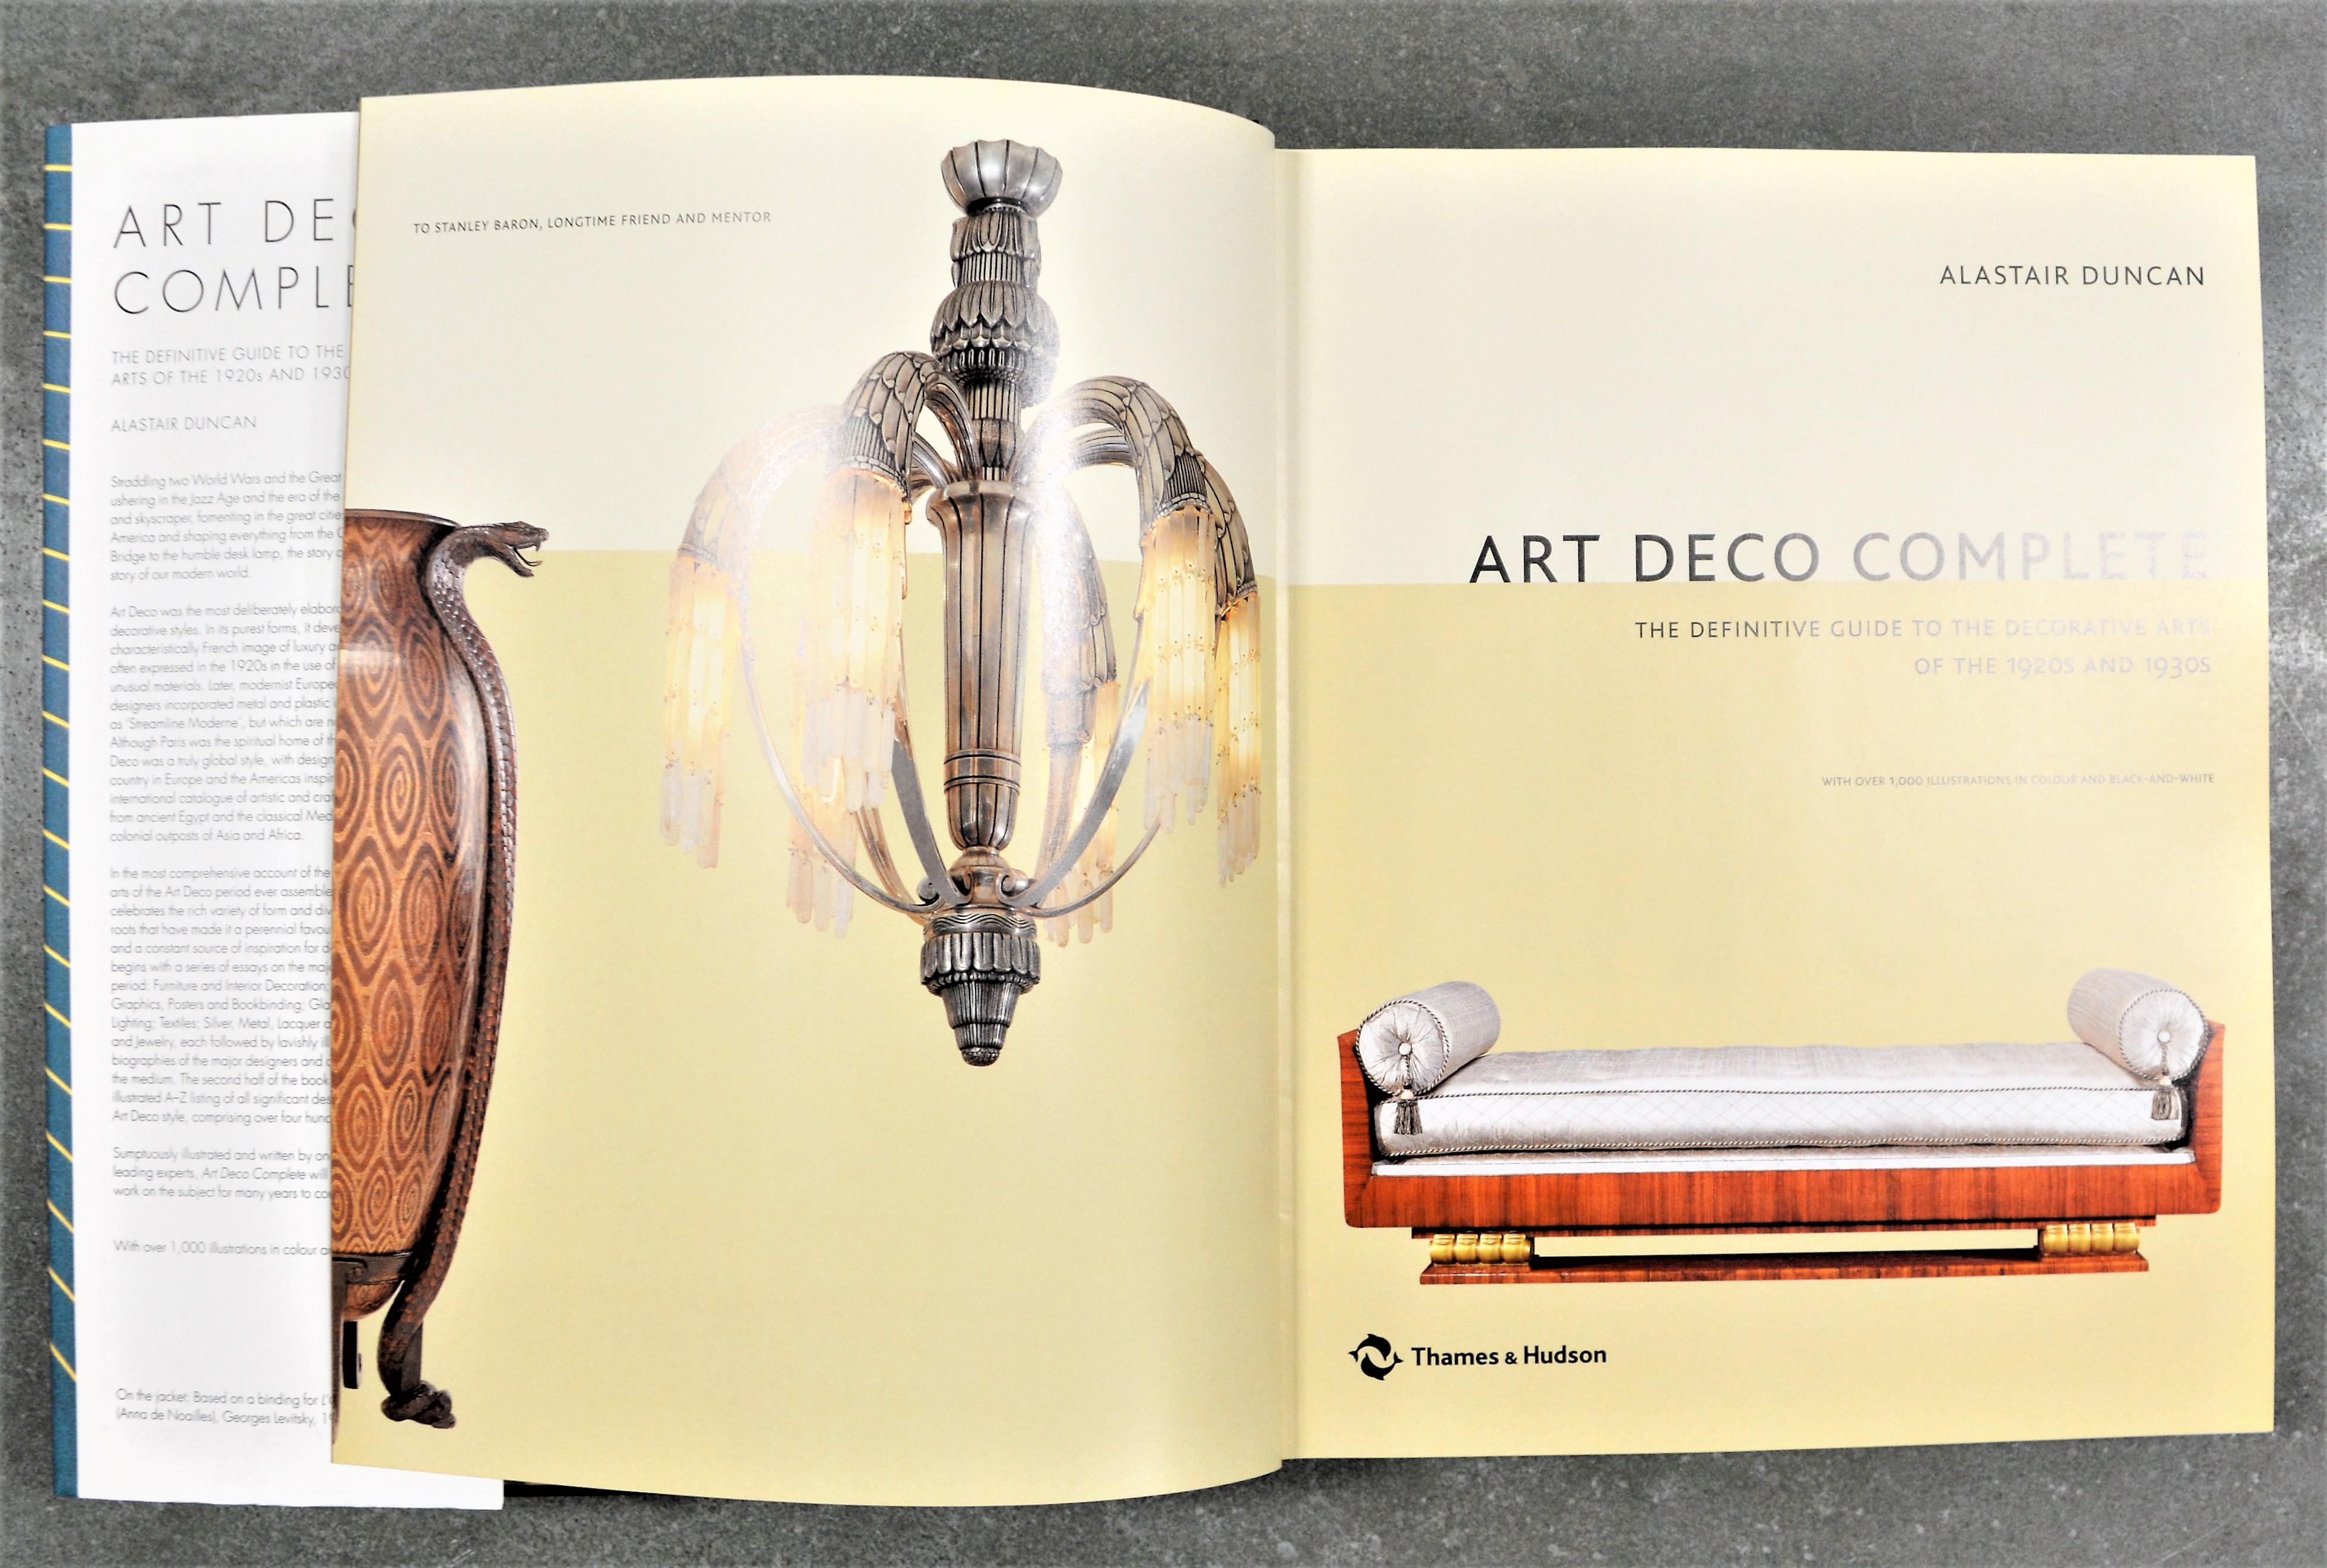 Art Deco Complete: The Definitive Guide to the Decorative Arts of the 1920s  and 1930s